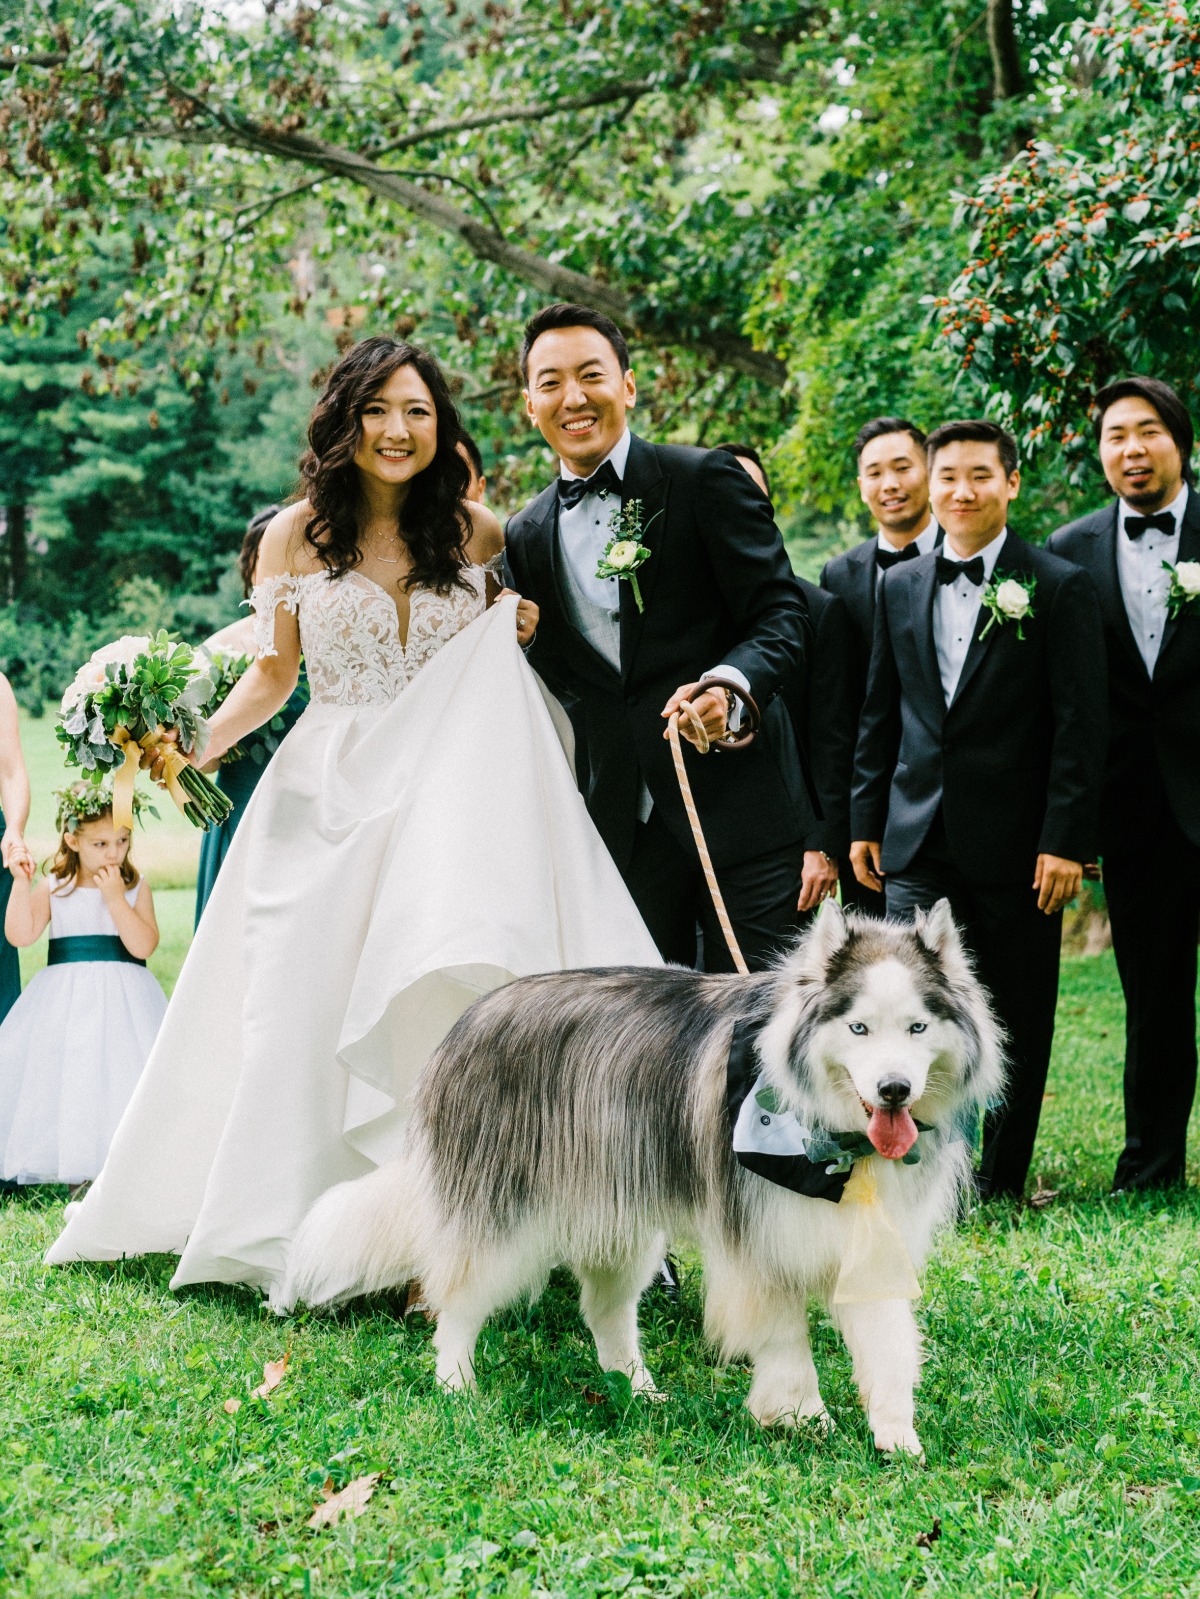 Portrait of bride and groom with dog